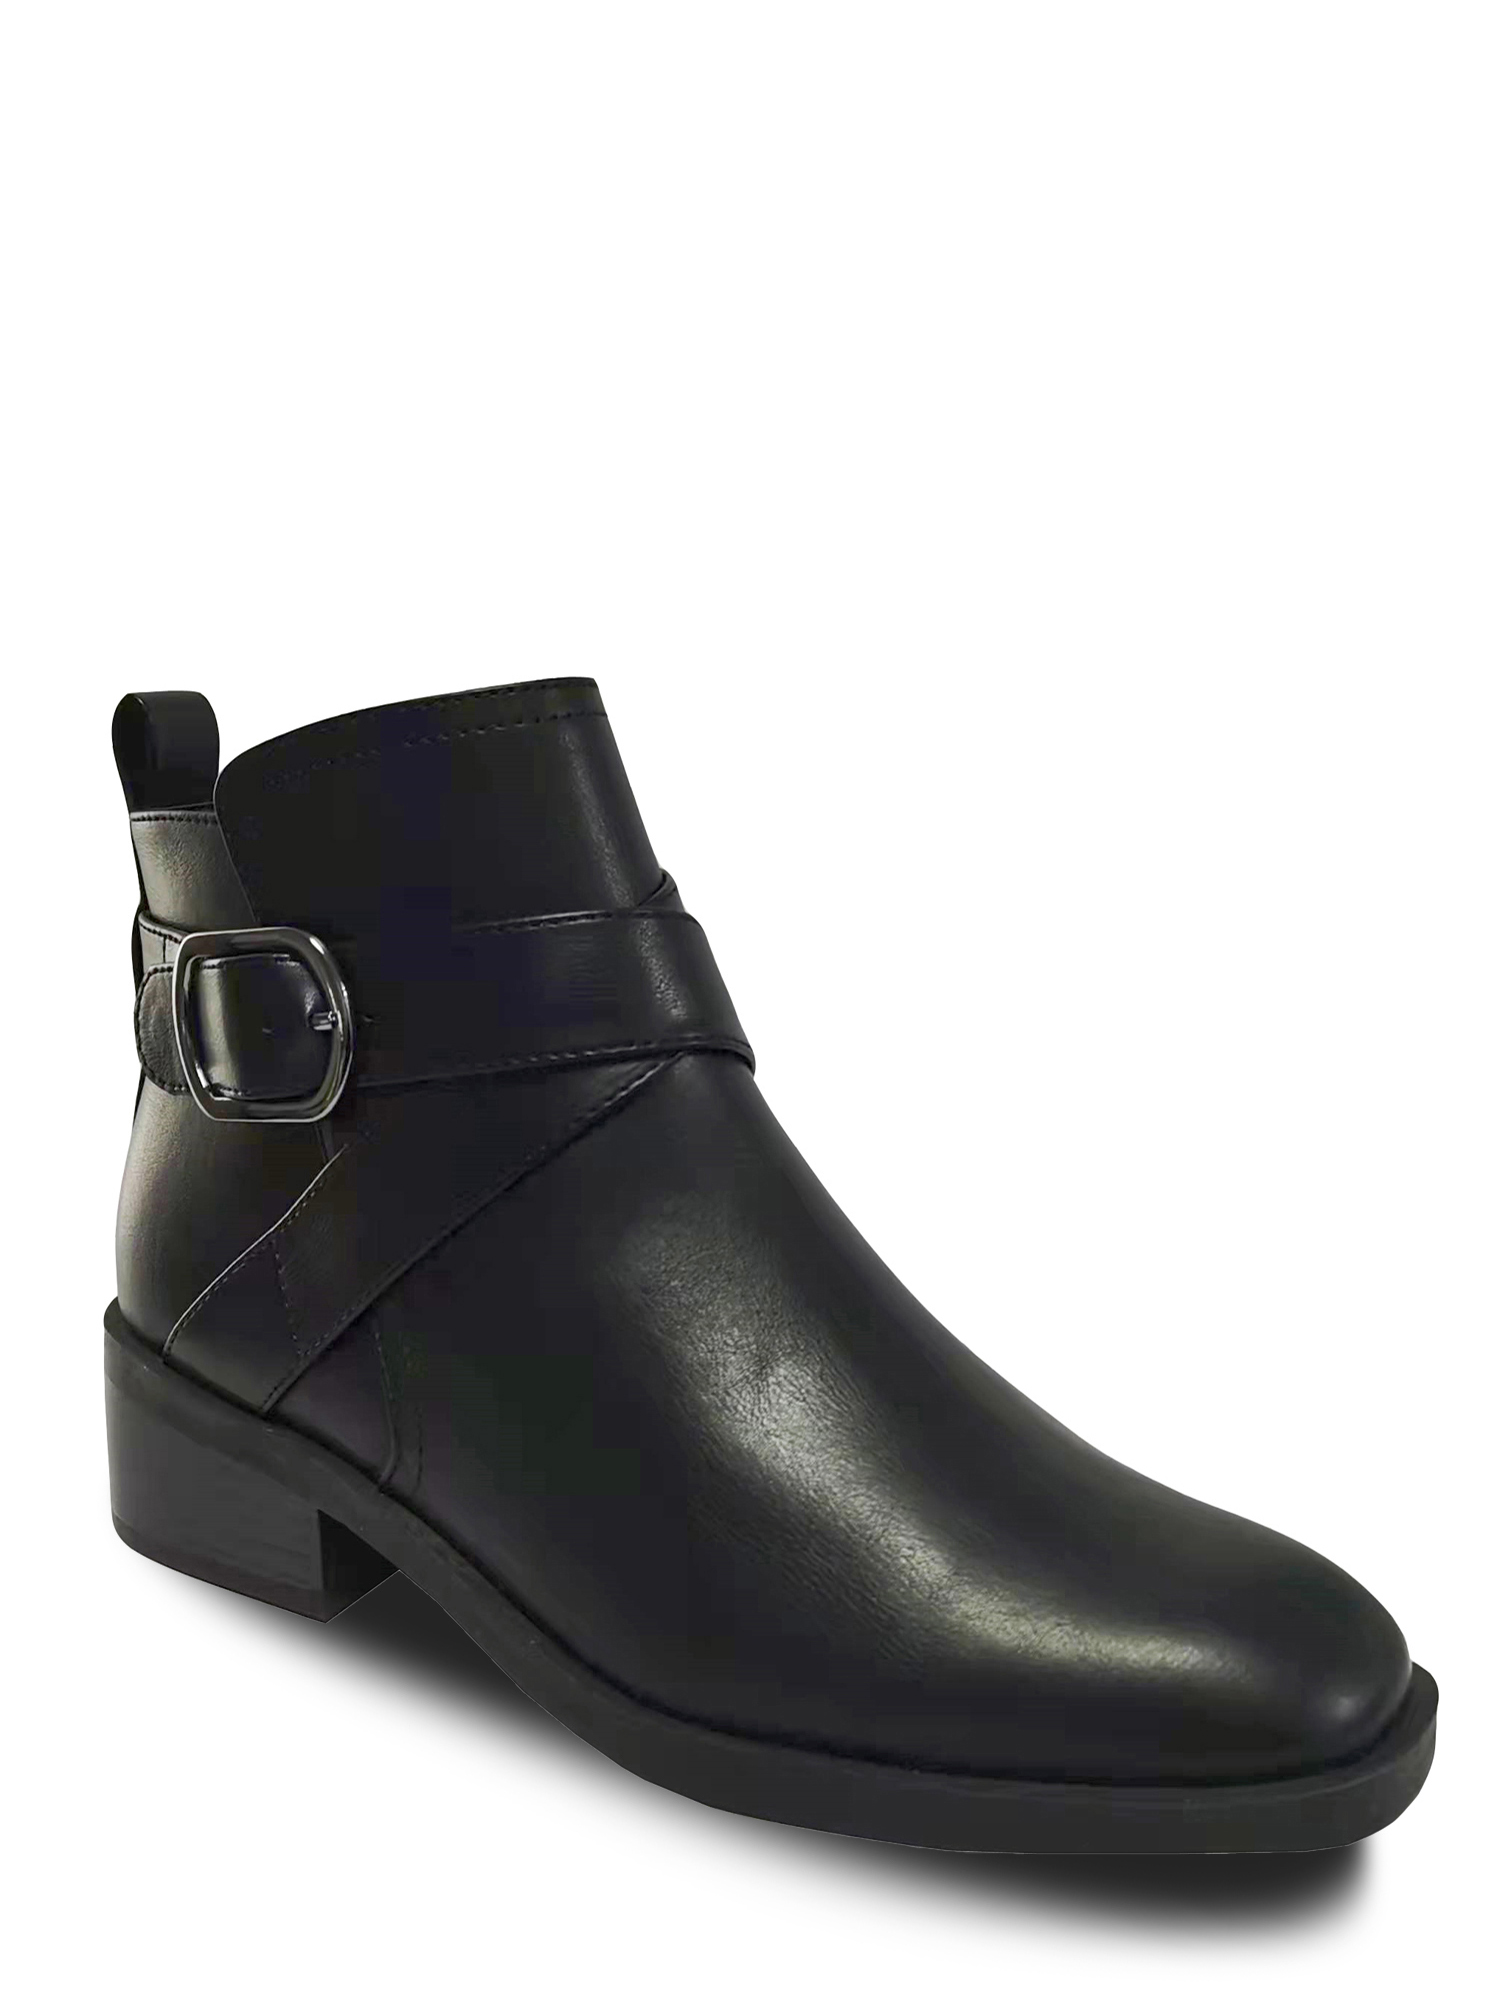 Time and Tru Women's Ankle Buckle Boots - Walmart.com